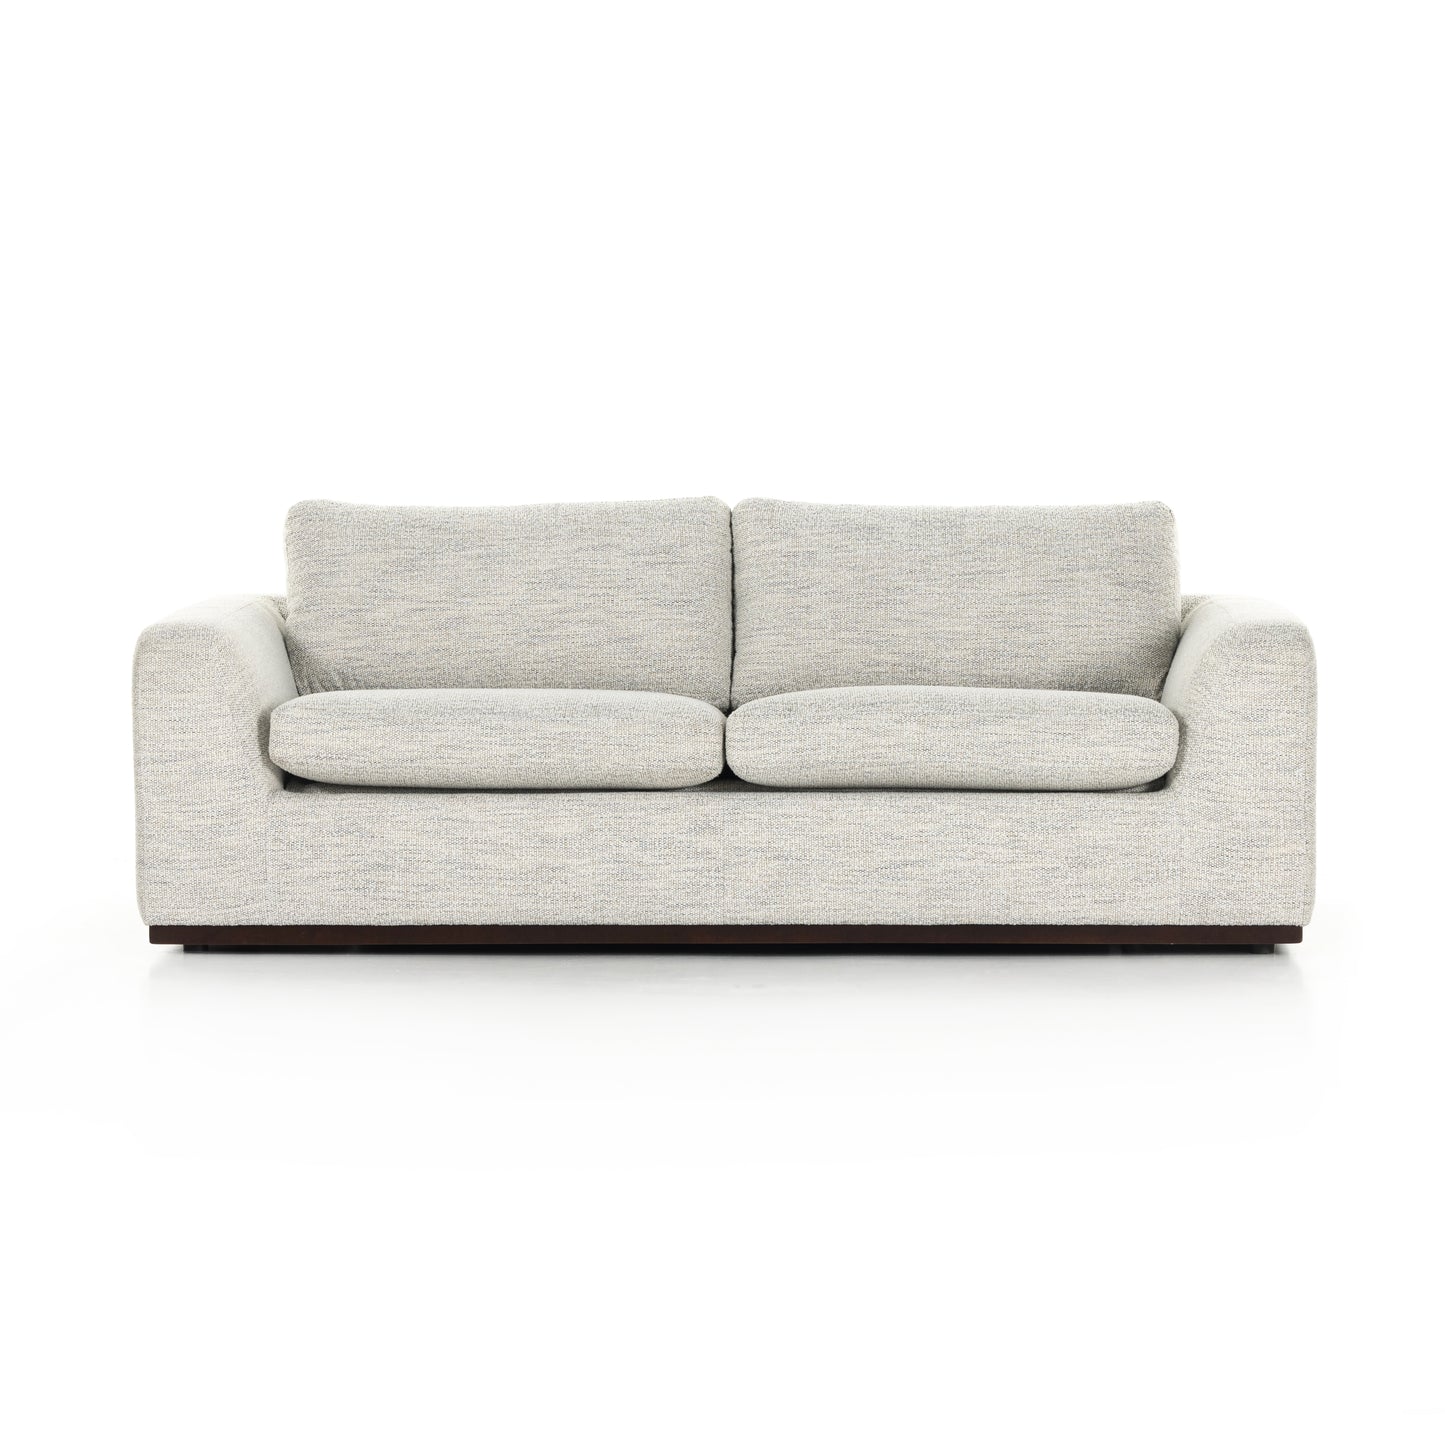 Load image into Gallery viewer, Colt Sofa Bed Sofabed Four Hands     Four Hands, Mid Century Modern Furniture, Old Bones Furniture Company, Old Bones Co, Modern Mid Century, Designer Furniture, https://www.oldbonesco.com/
